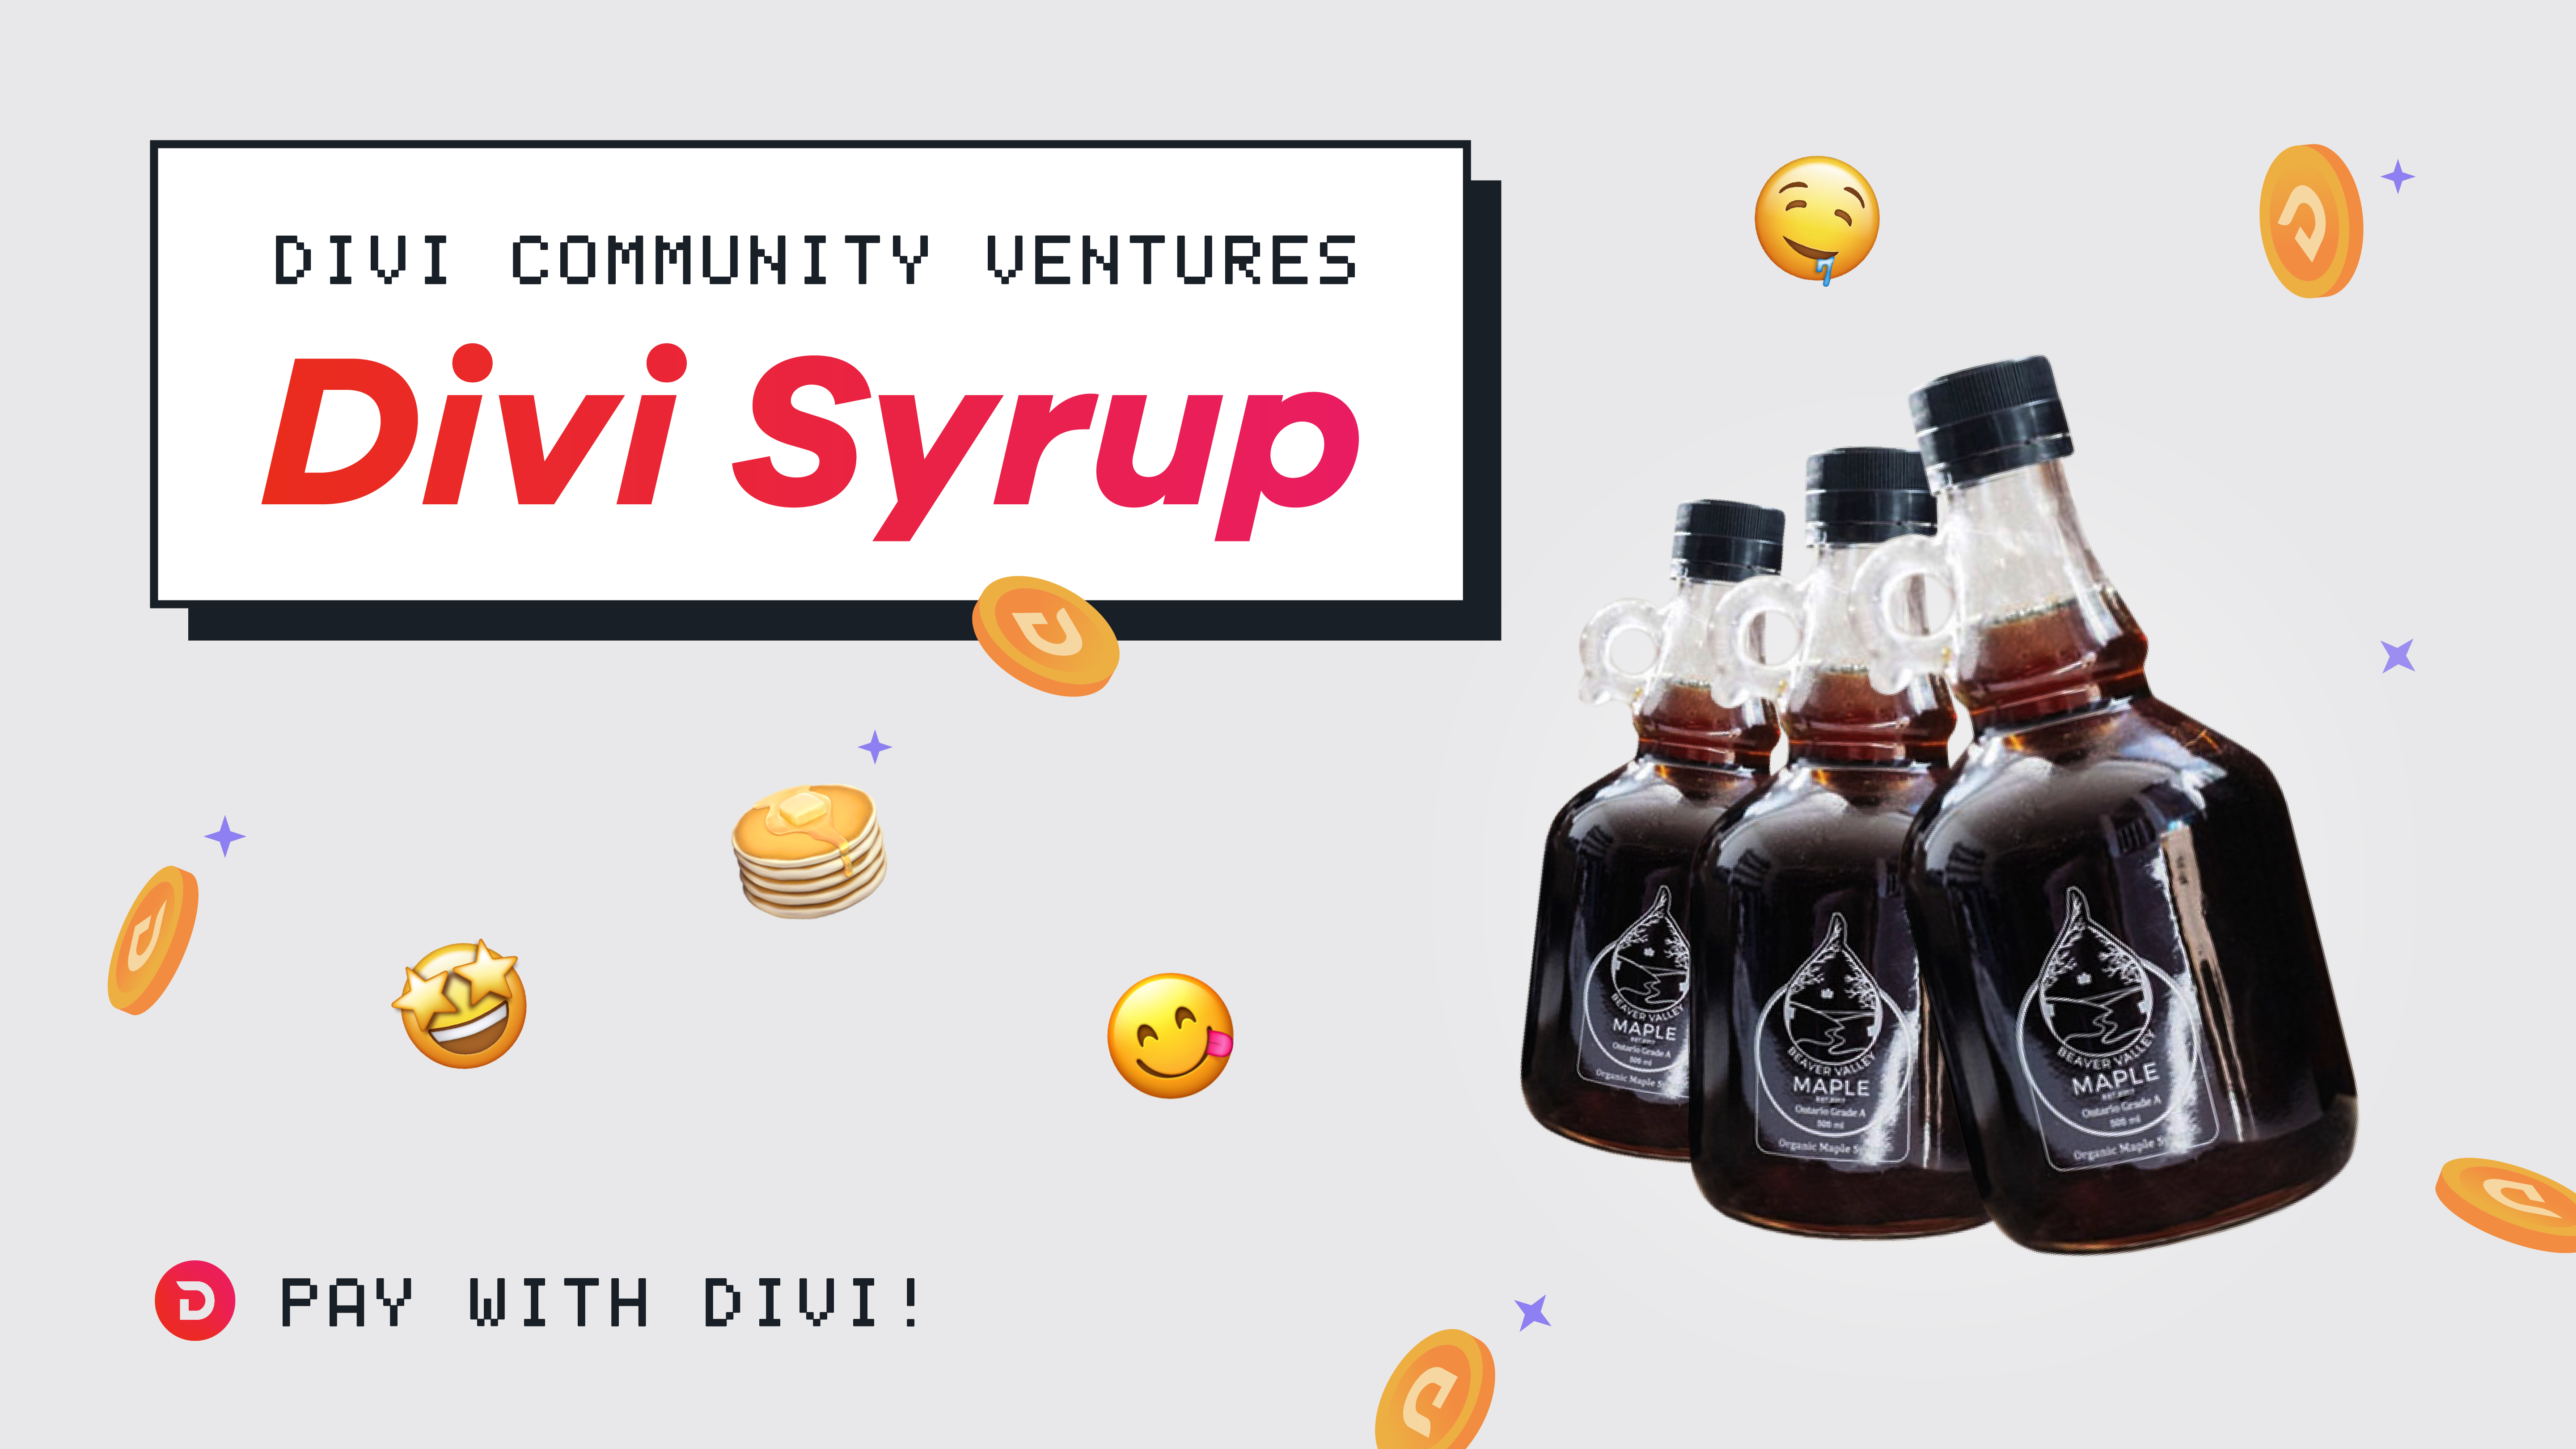 Divi Maple Syrup!